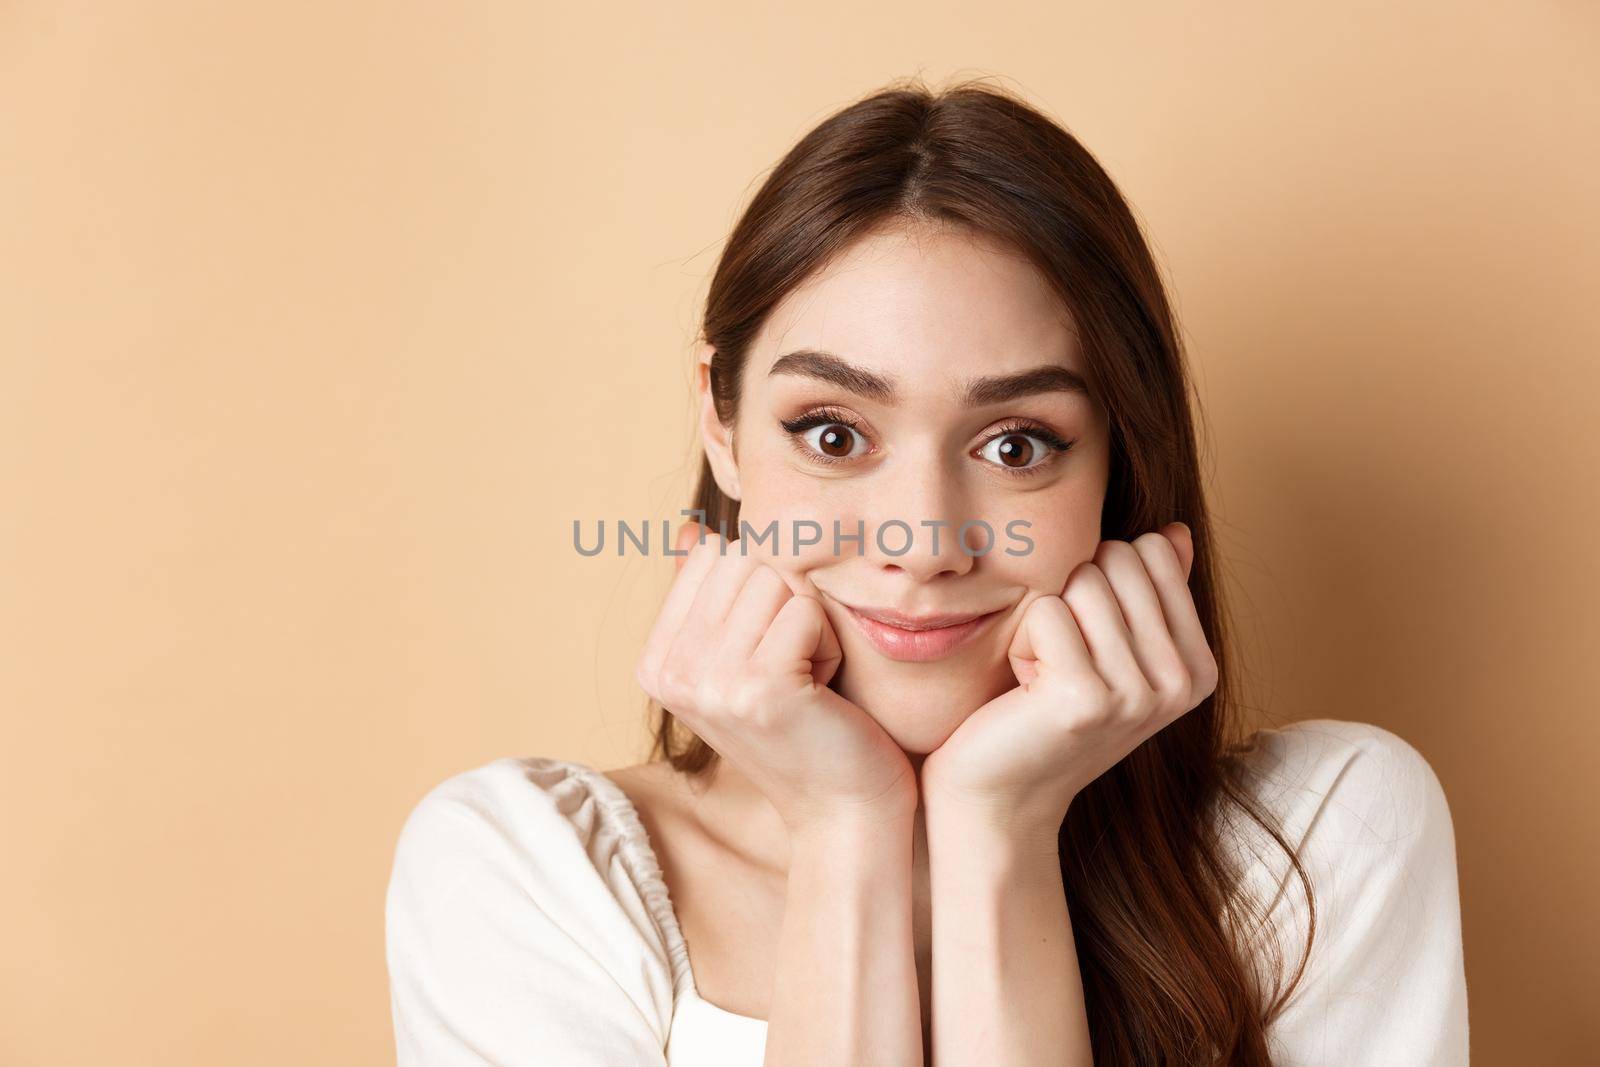 Portrait of intrigued girl listening with interest and excitement, hear interesting story, smiling amused, standing on beige background.